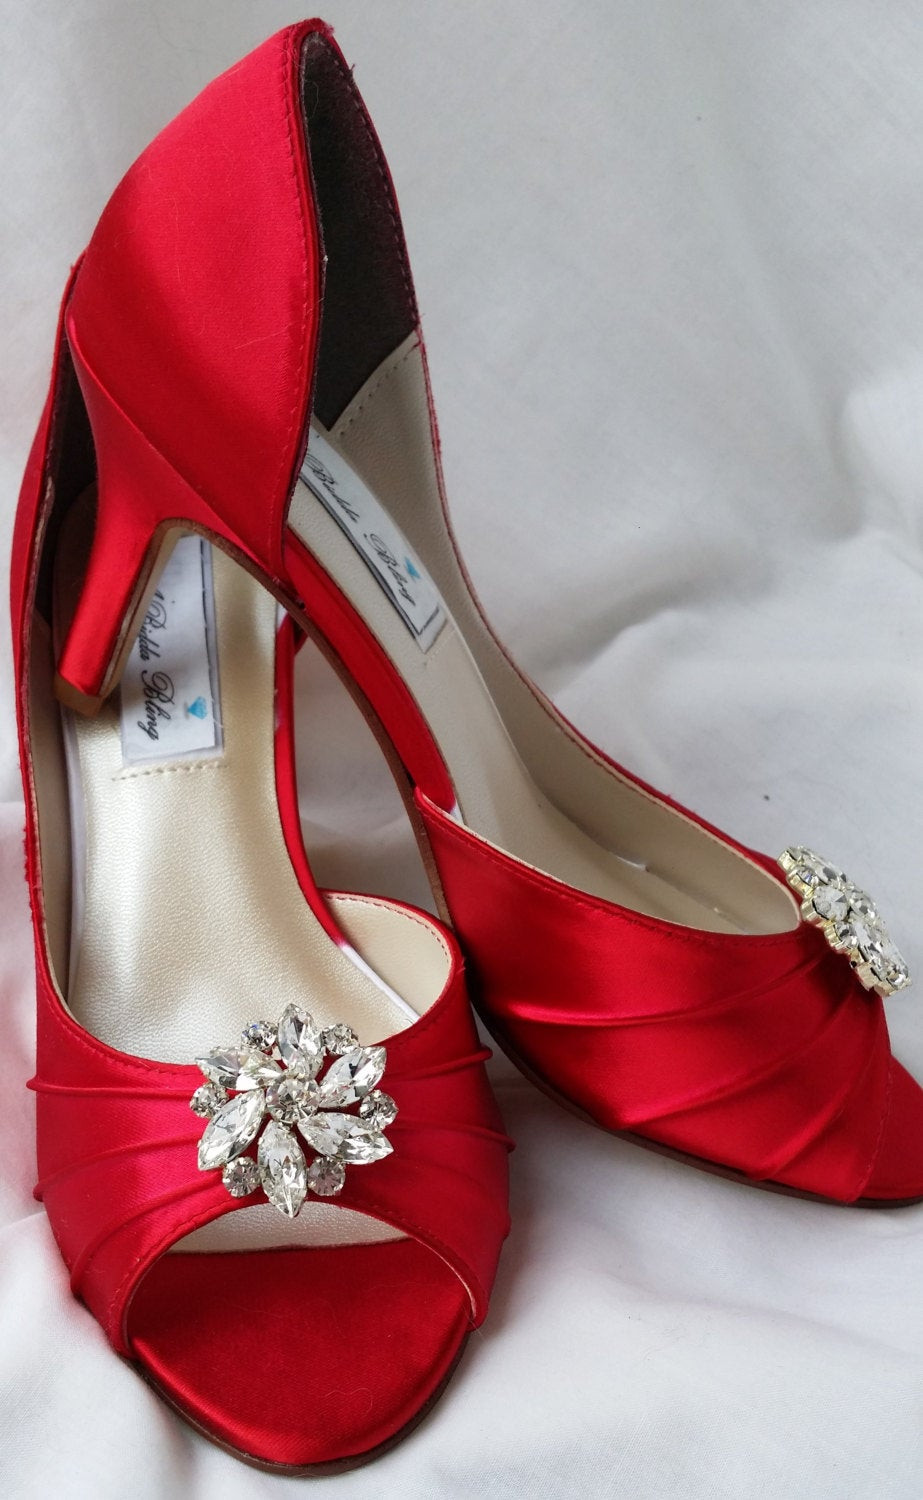 Wedding Shoes Red
 Wedding Shoes Red Bridal Shoes Crystal Rhinestone Flower Shoes